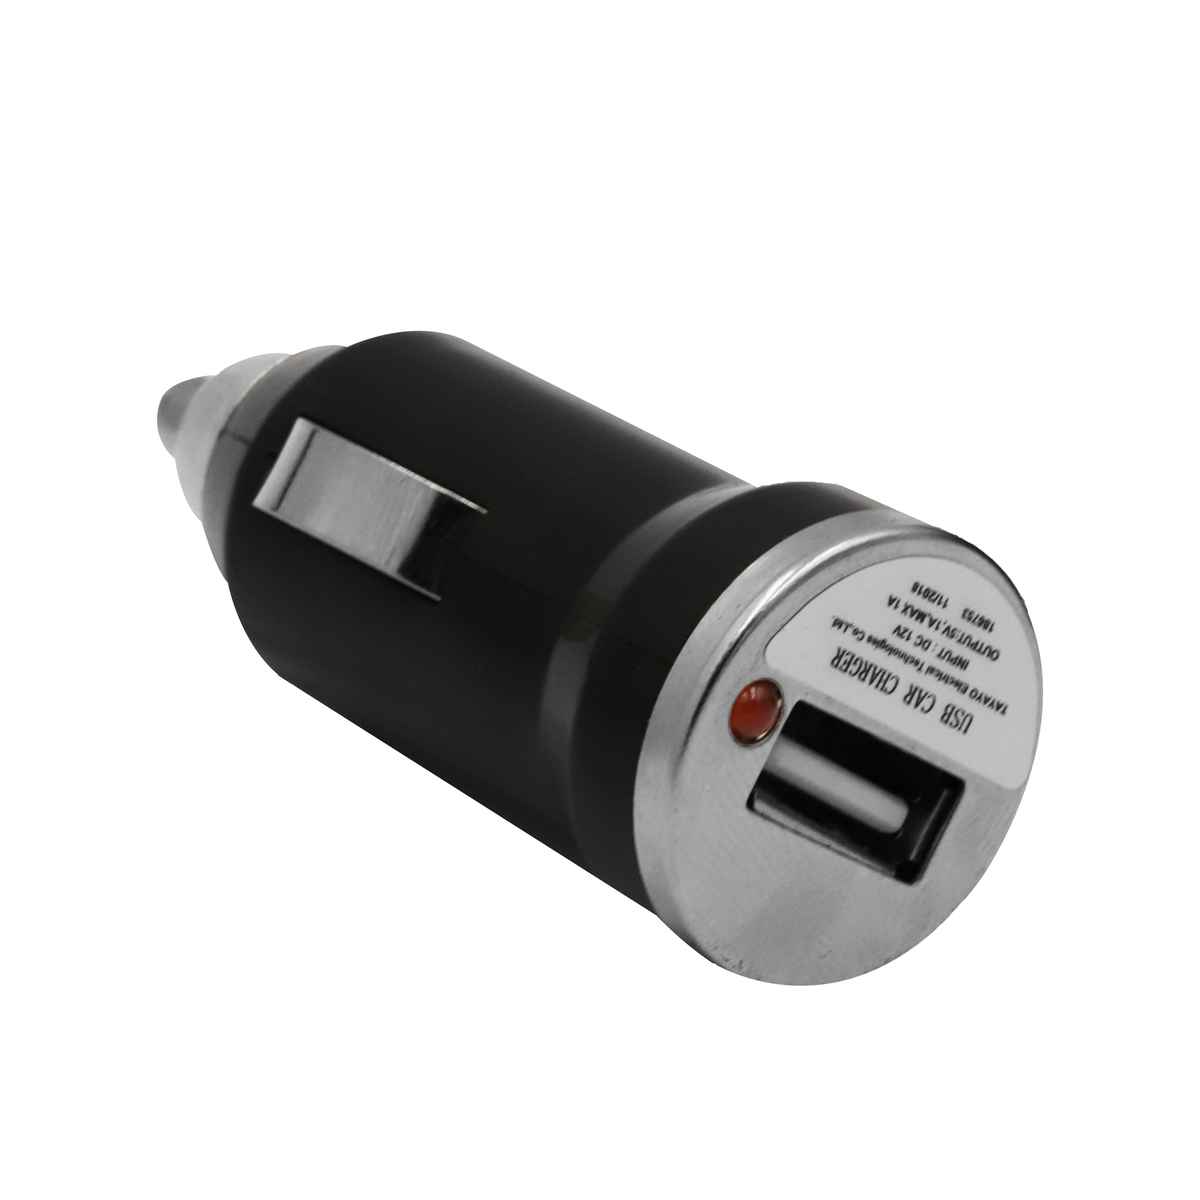 4. LM-3019278 Universal Mobile USB Car Socket Bulk Purchase and Corporate purchase from China Union Power -Description-